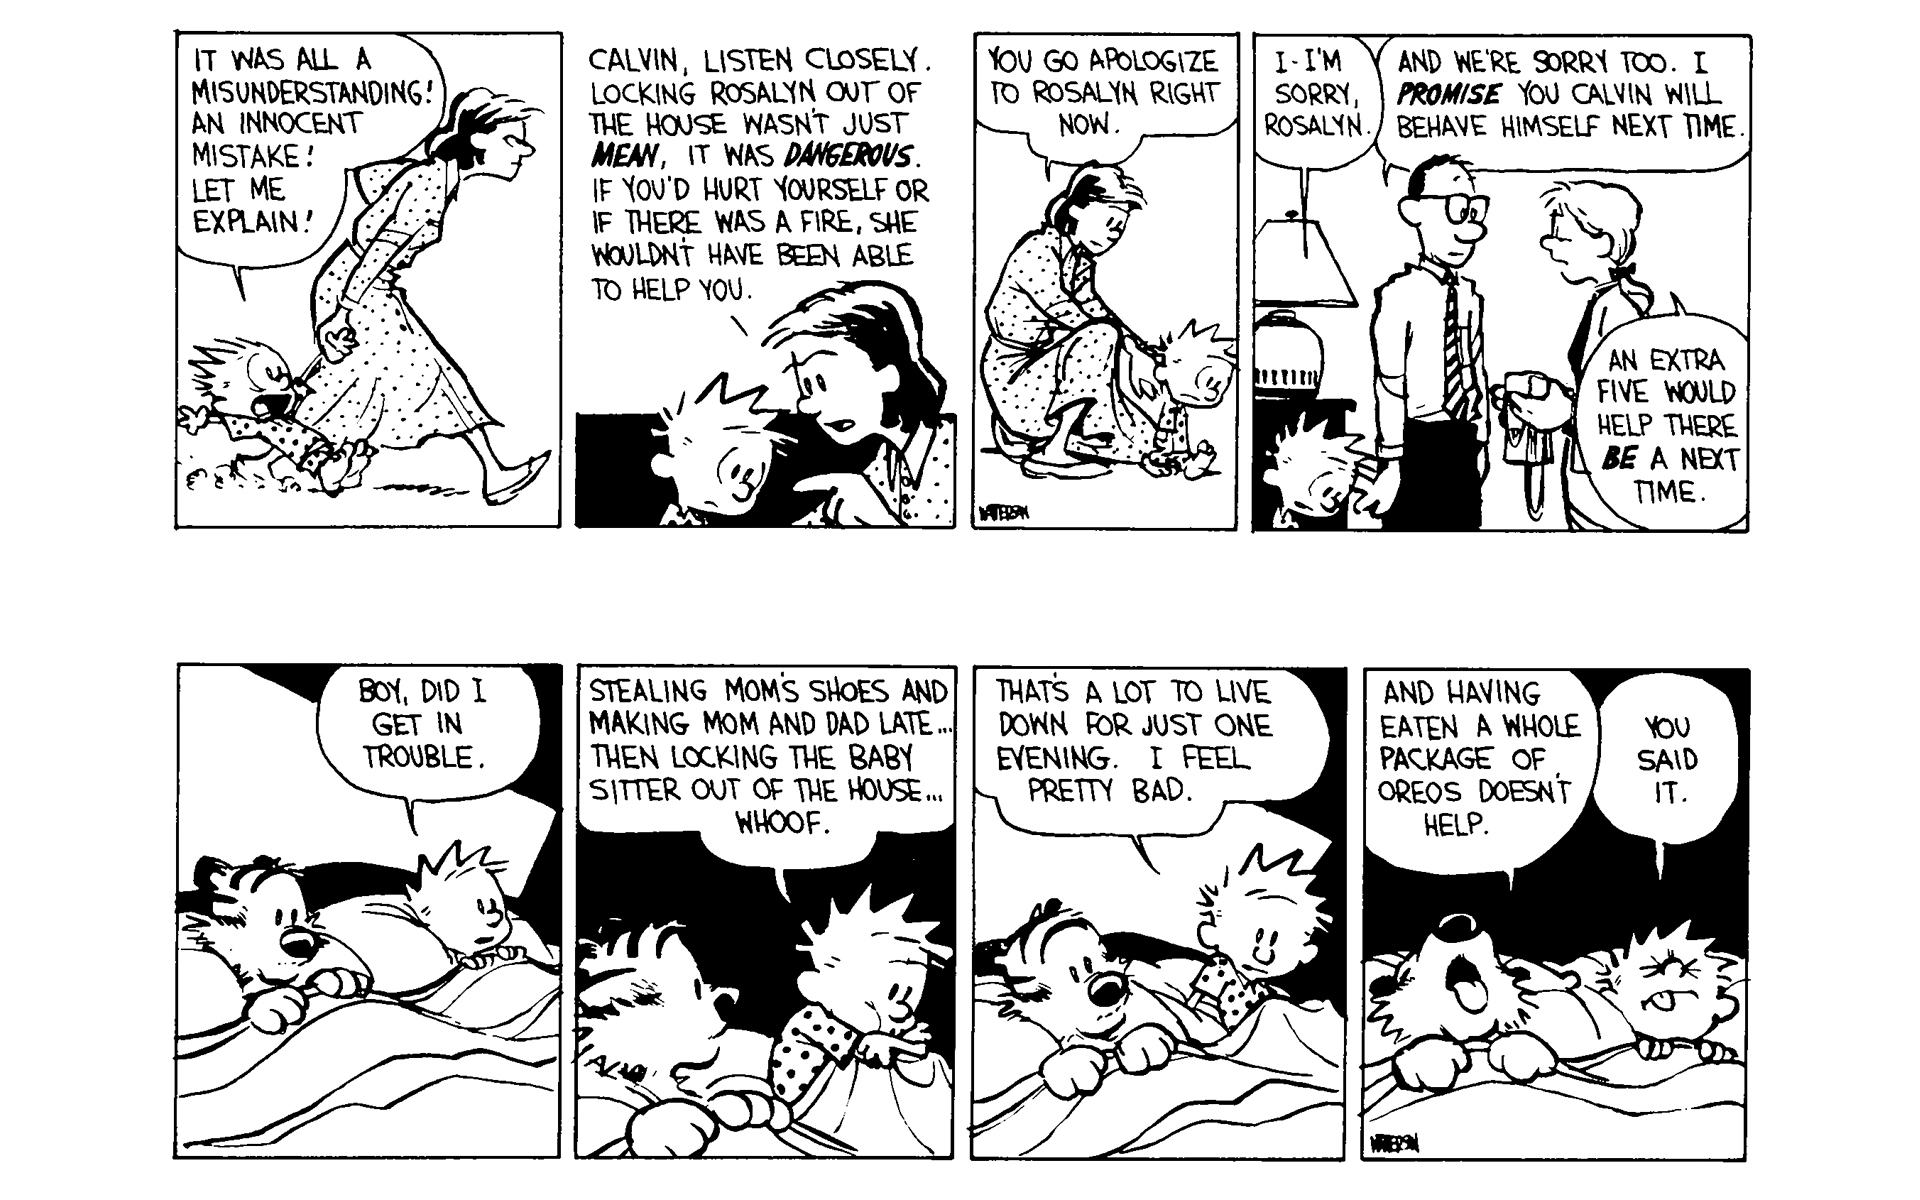 Calvin and Hobbes Issue 6 | Viewcomic reading comics online ...